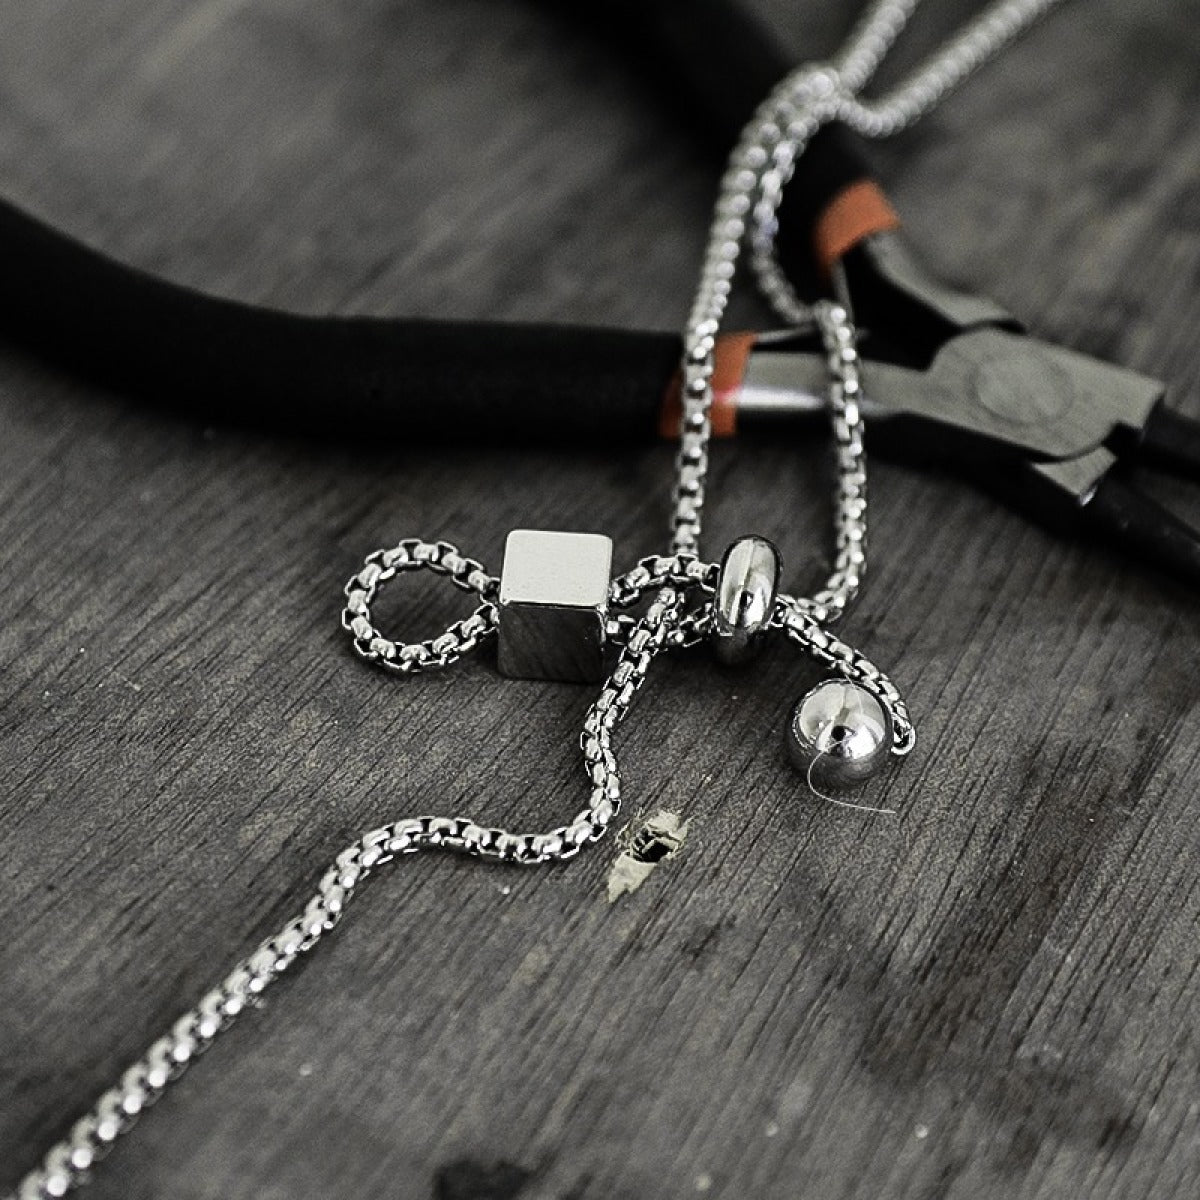 Adjustable Knot Design Square Ball Charm Necklace